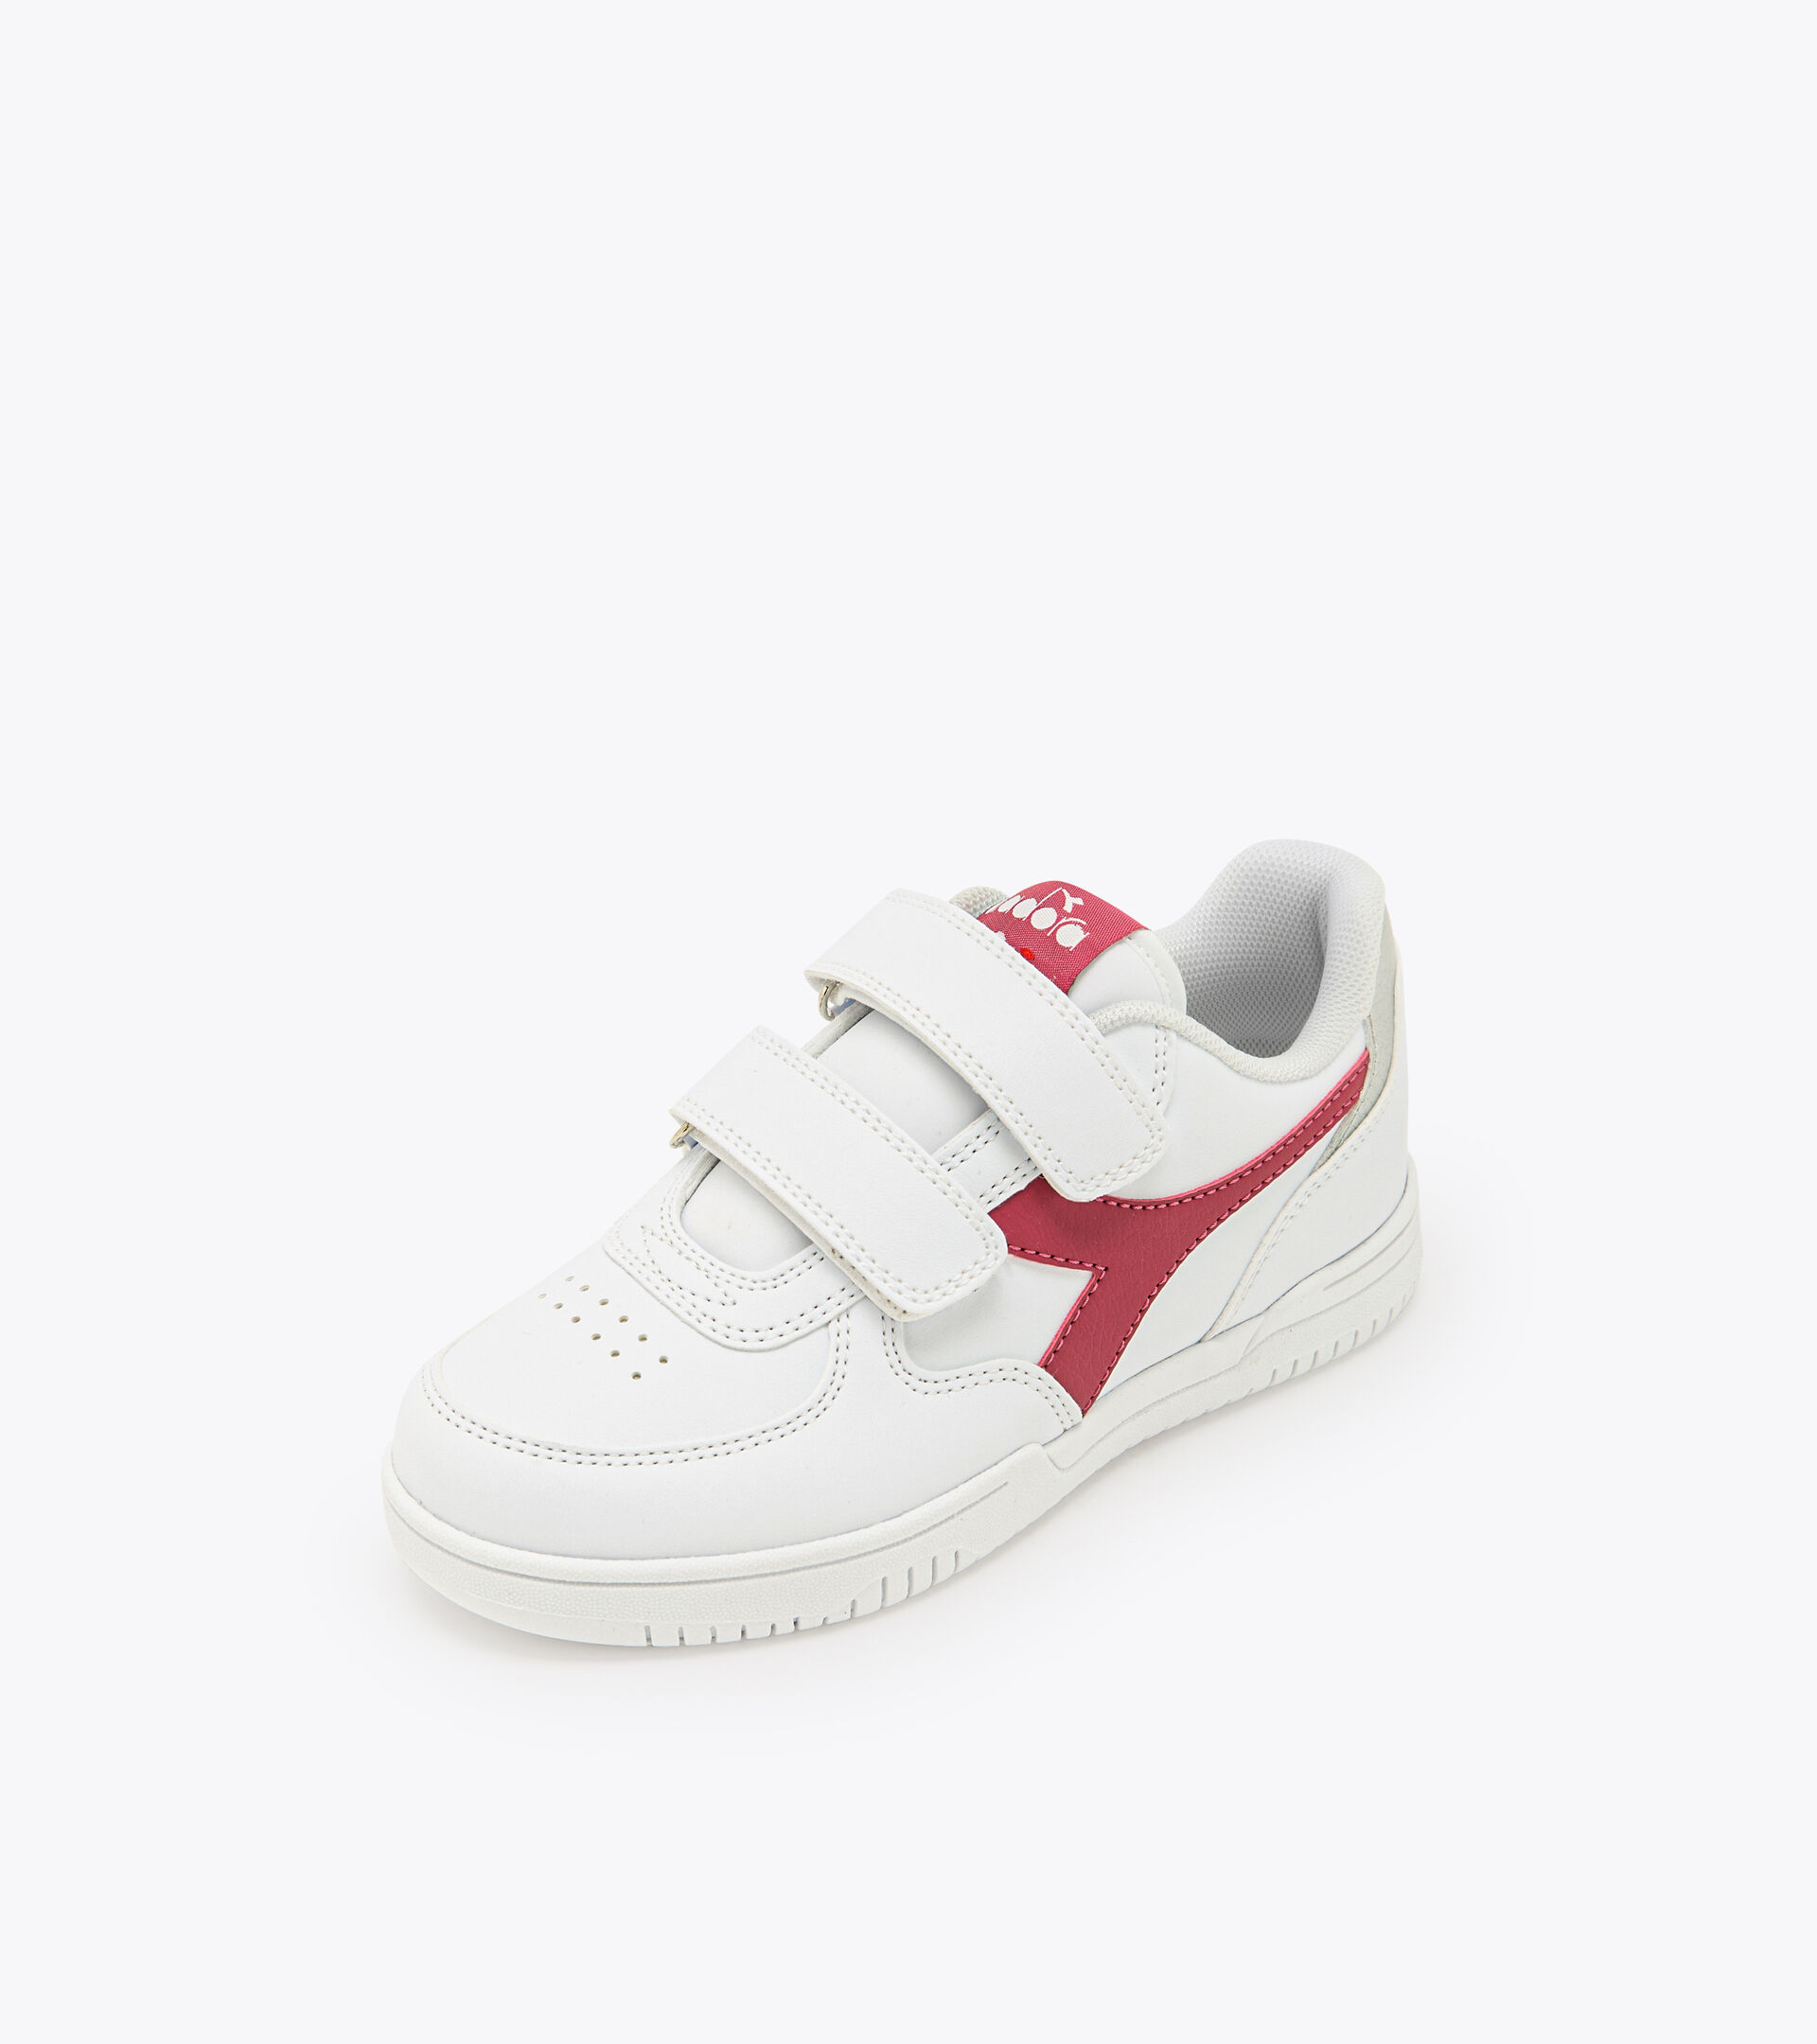 Sports shoes - Kids 4-8 years RAPTOR LOW PS WHITE/PERSIAN RED - Diadora